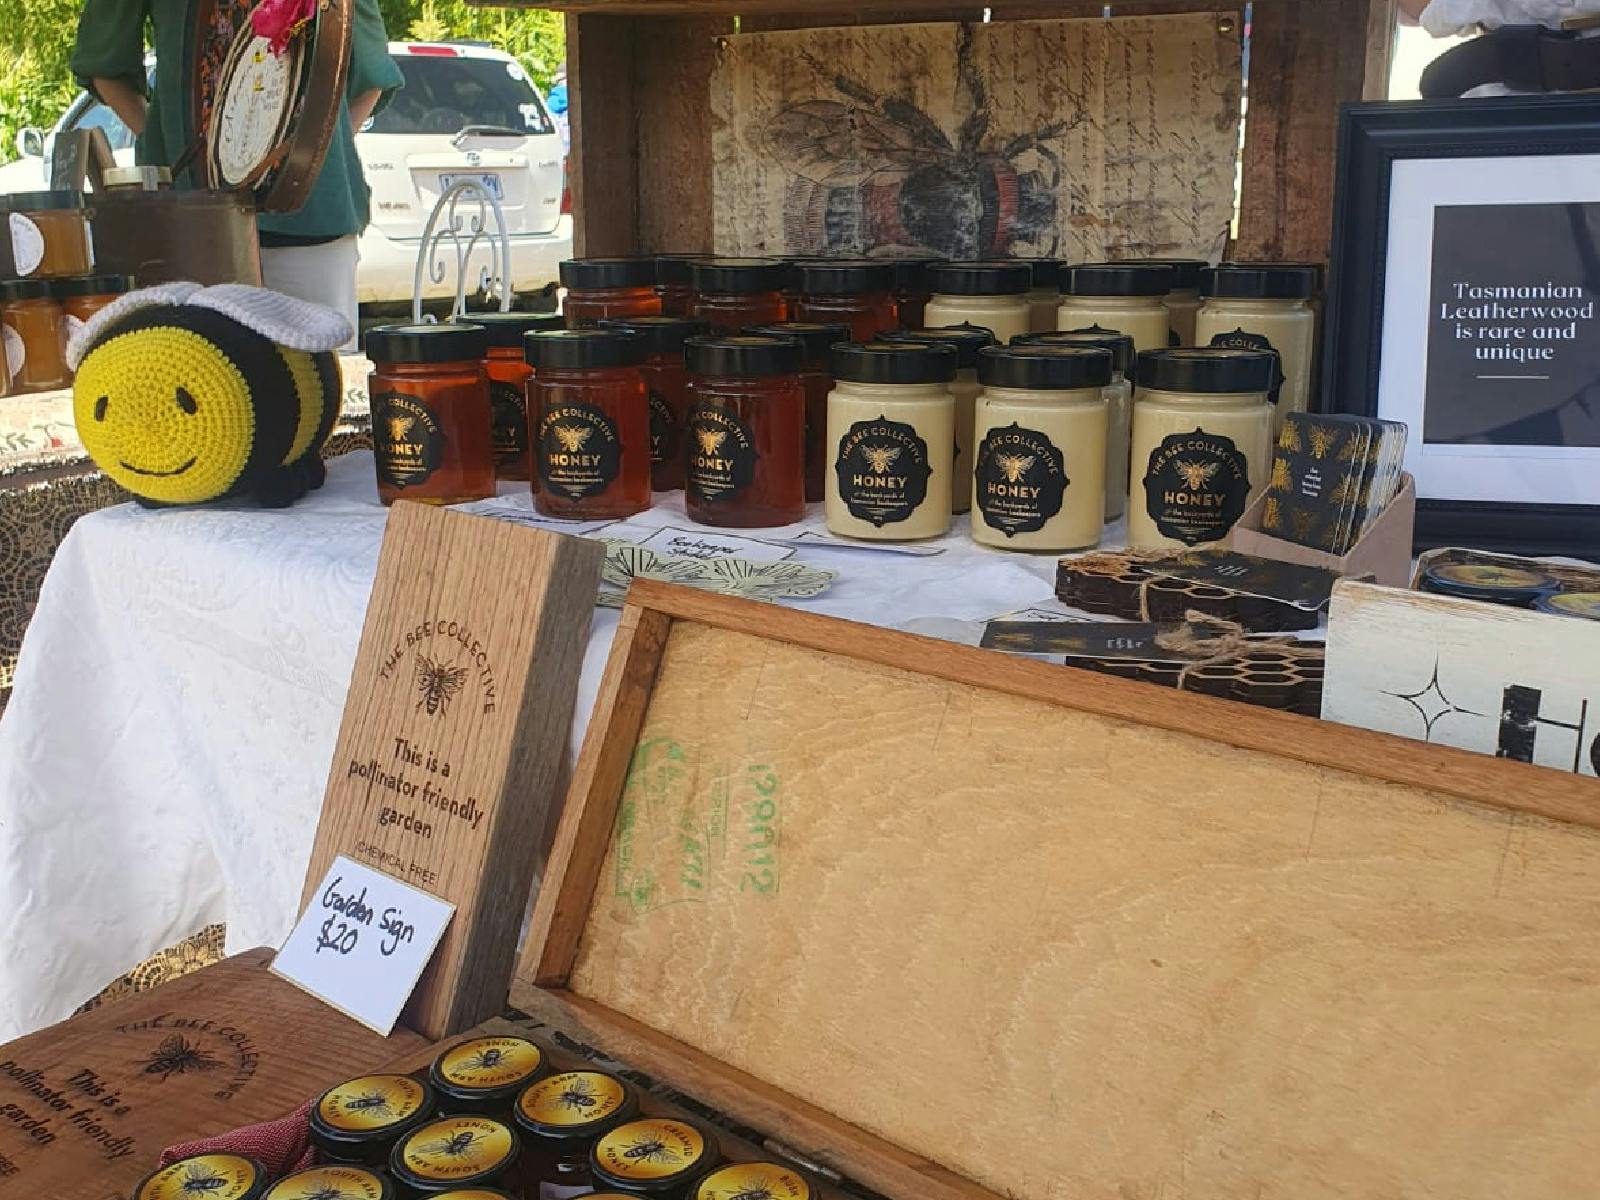 A local leatherwood honey company selling their jars on a stall.